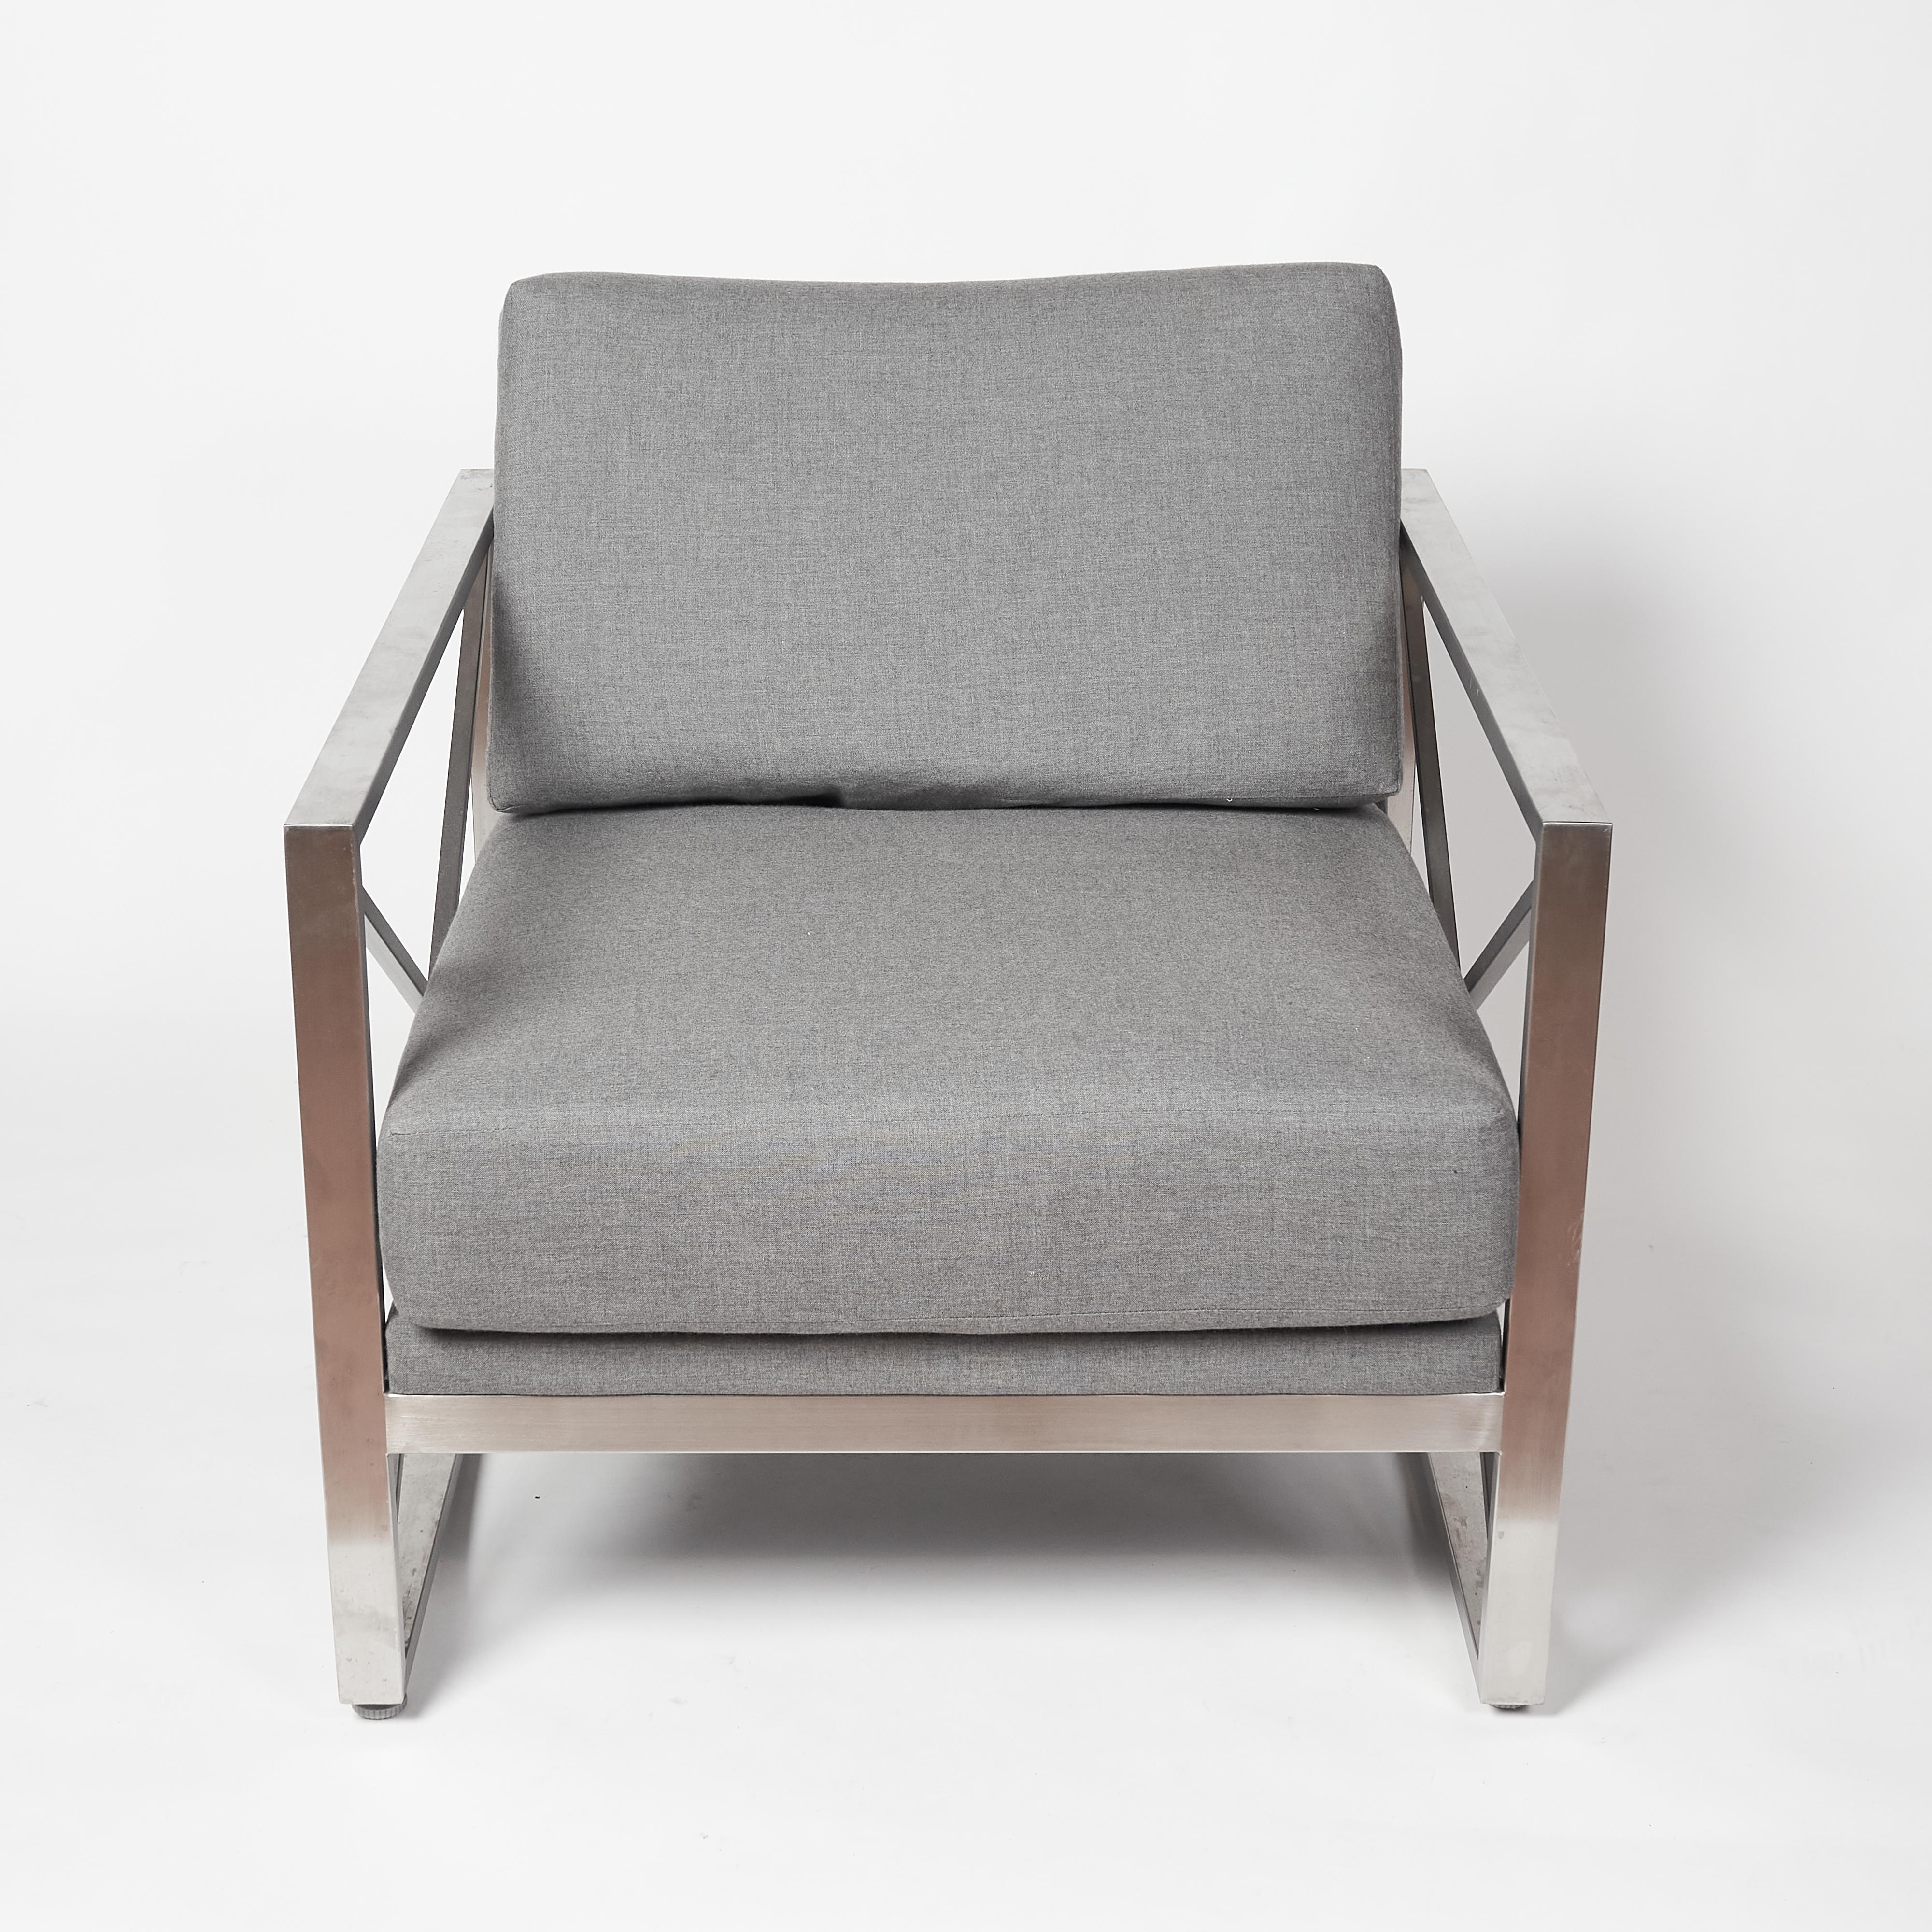 The Acero chair is constructed with a stainless steel frame, finished in cast slate. The cushions are covered in a medium gray Sunbrella fabric, which makes it perfect for any indoor and outdoor setting. With a sleek design, this piece will match